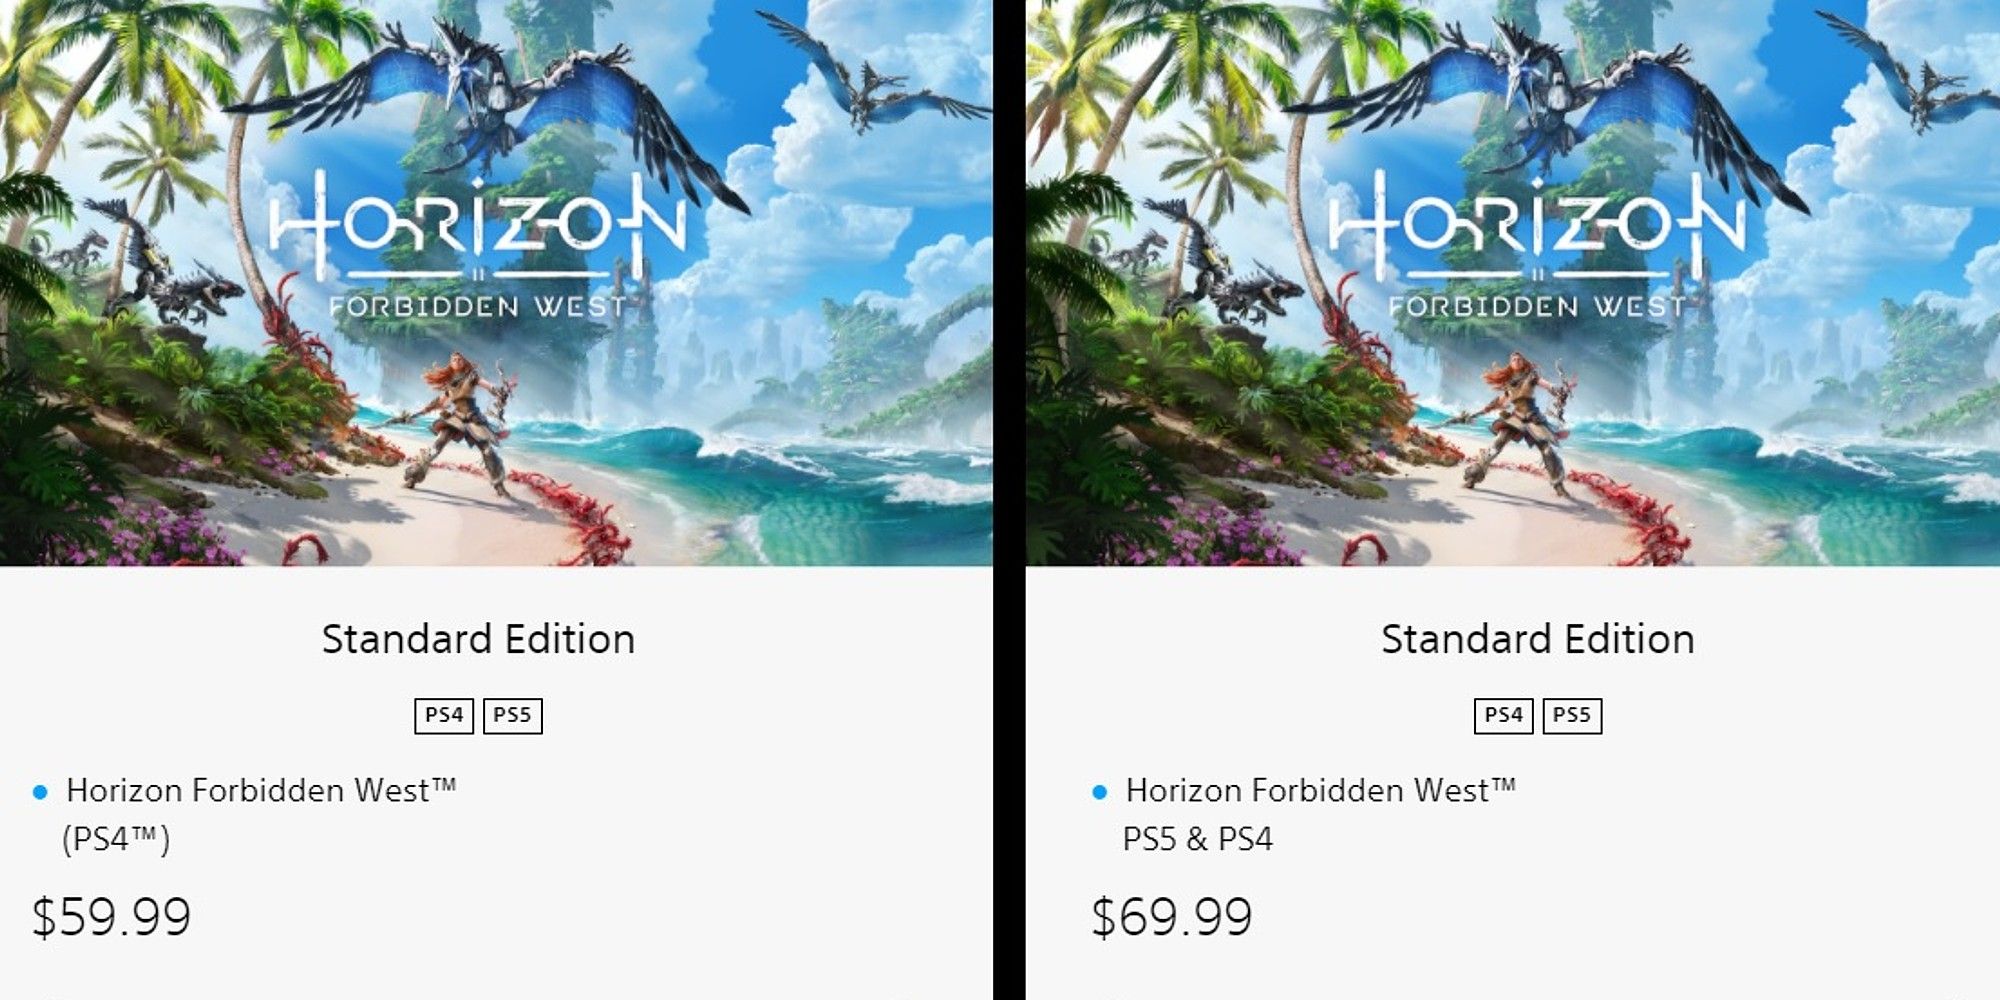 PSA: Don't Buy The PS5 Horizon Forbidden West, Get The PS4 Version